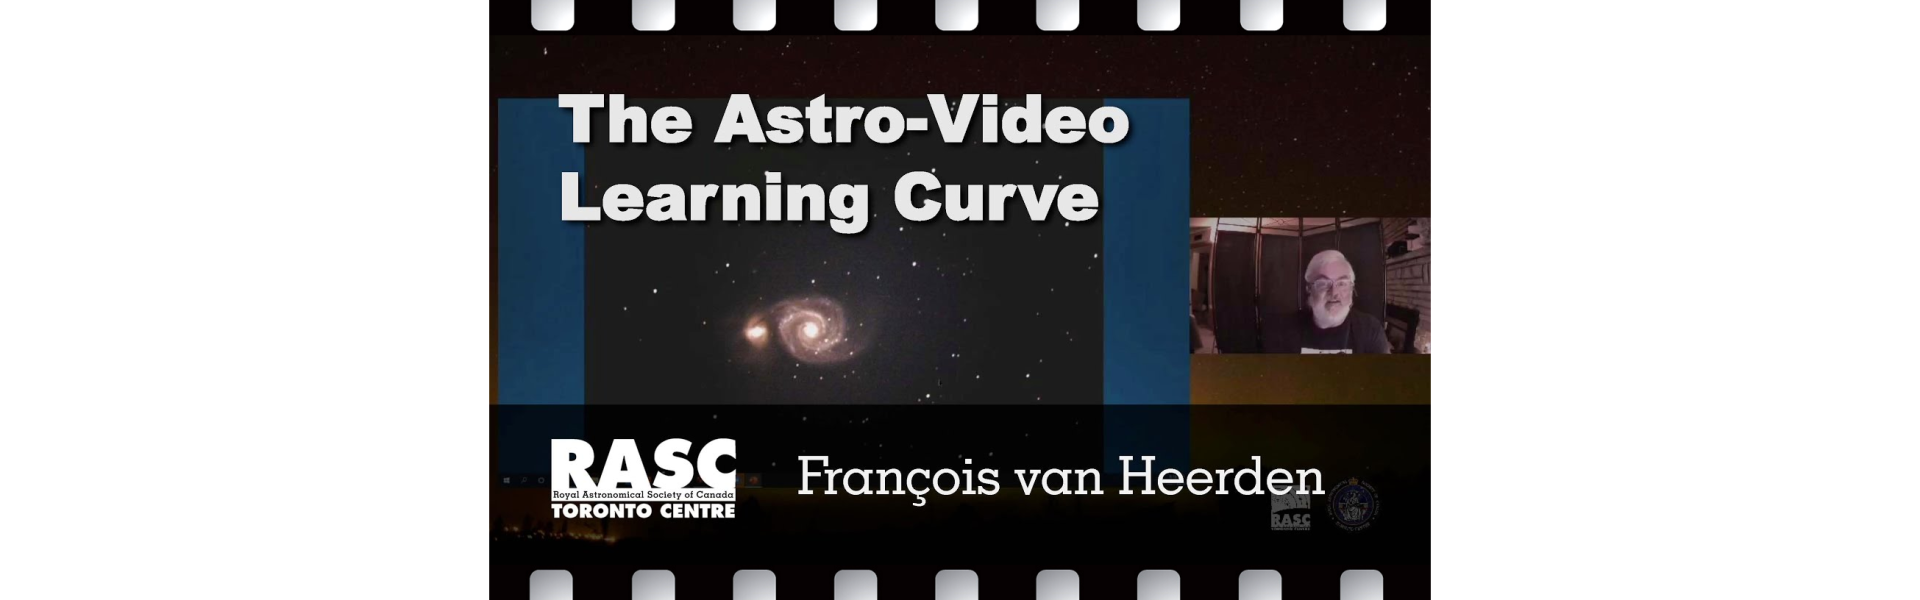 The Astro-Video Learning Curve